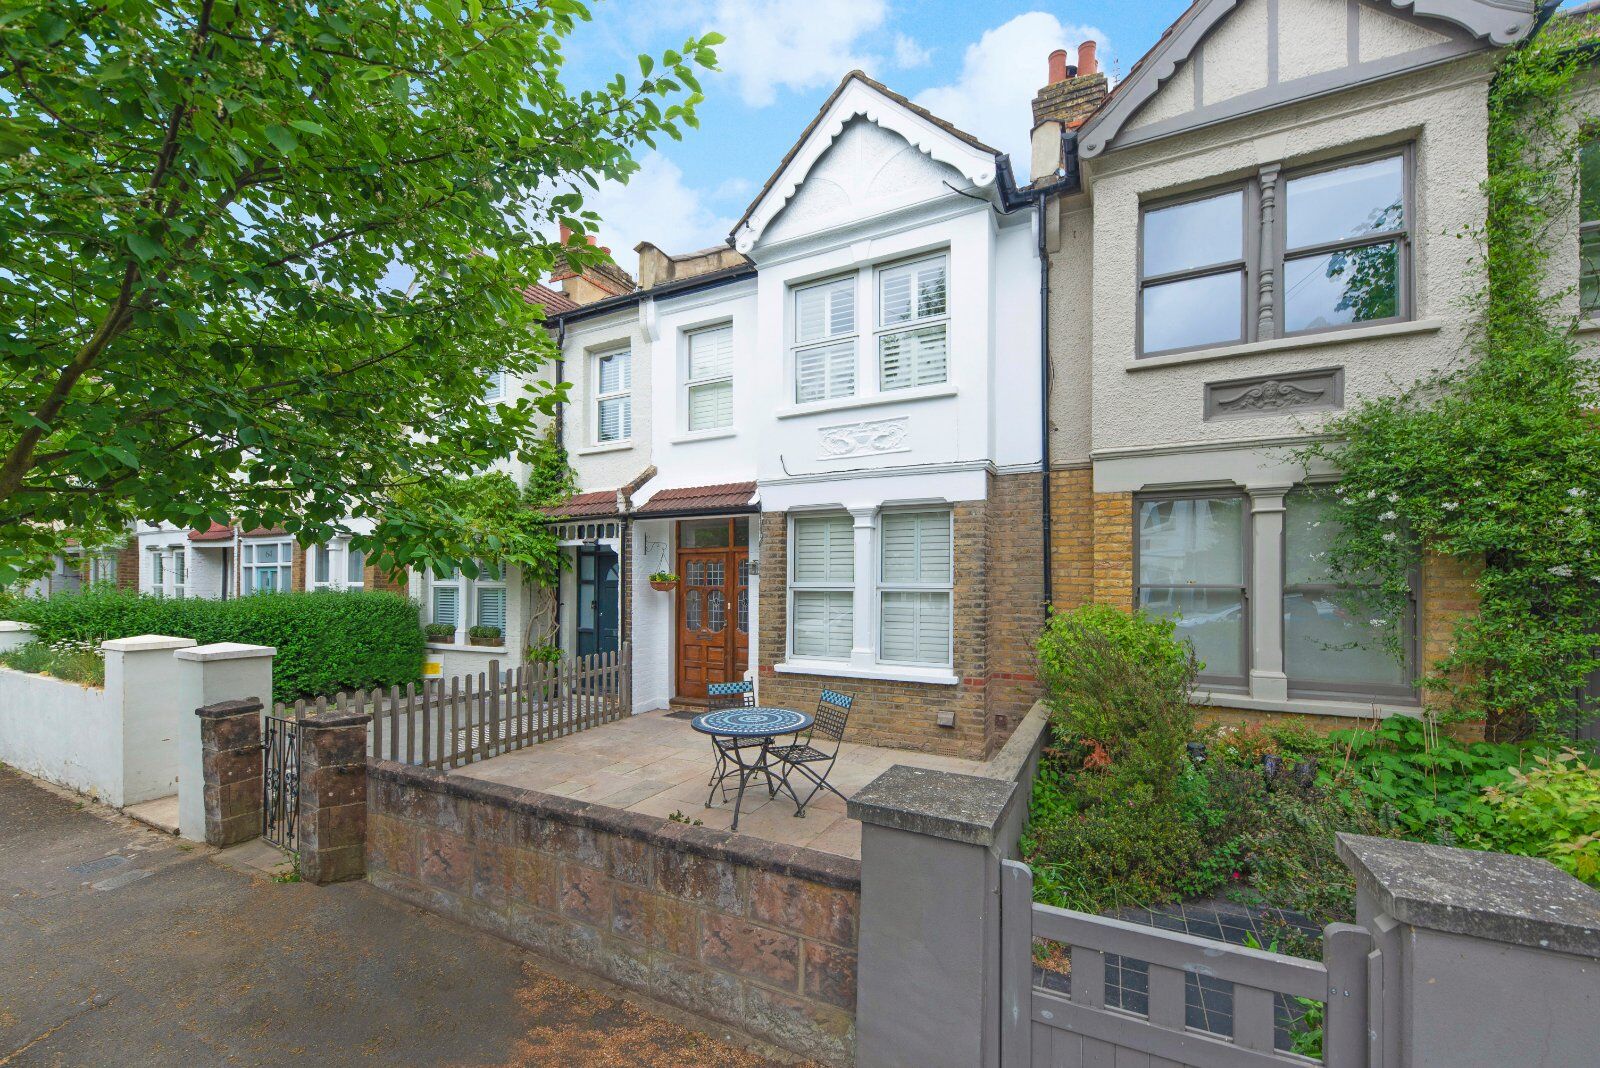 3 bedroom mid terraced house for sale Prince Georges Avenue, Raynes Park, SW20, main image